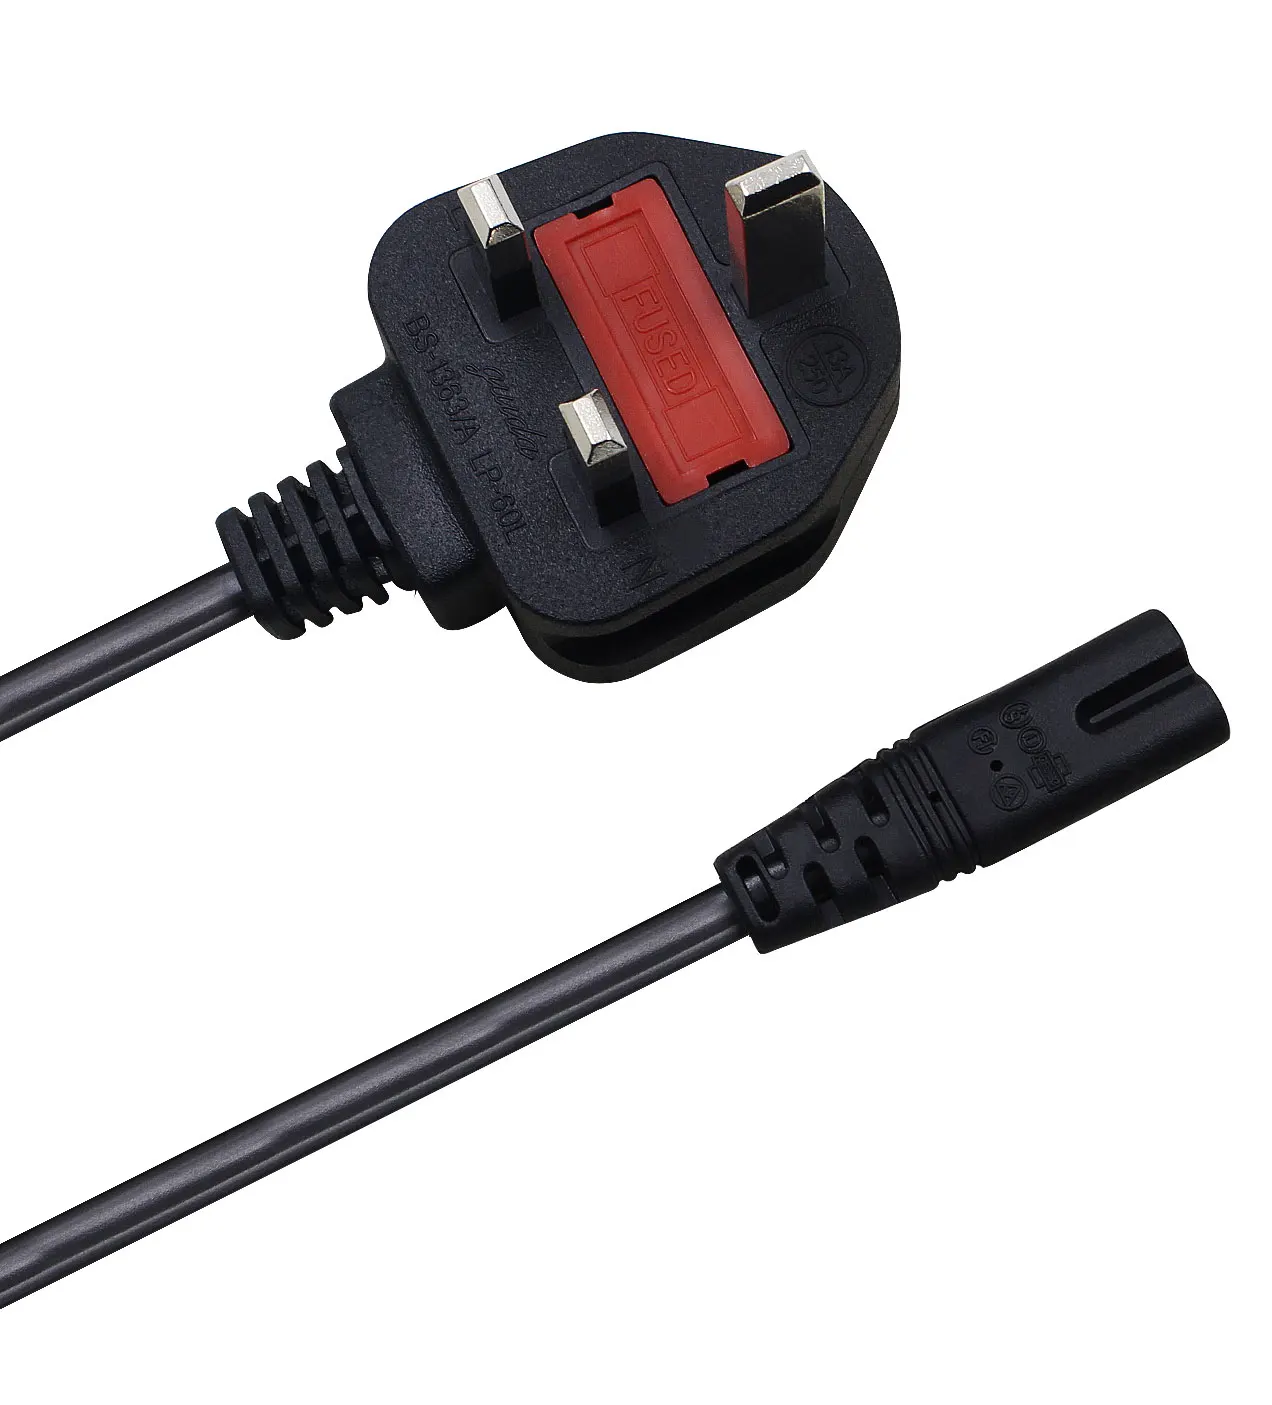 Singer UK Mains 2 PIn Power Lead Cable Cord For Singer Sewing Machines 